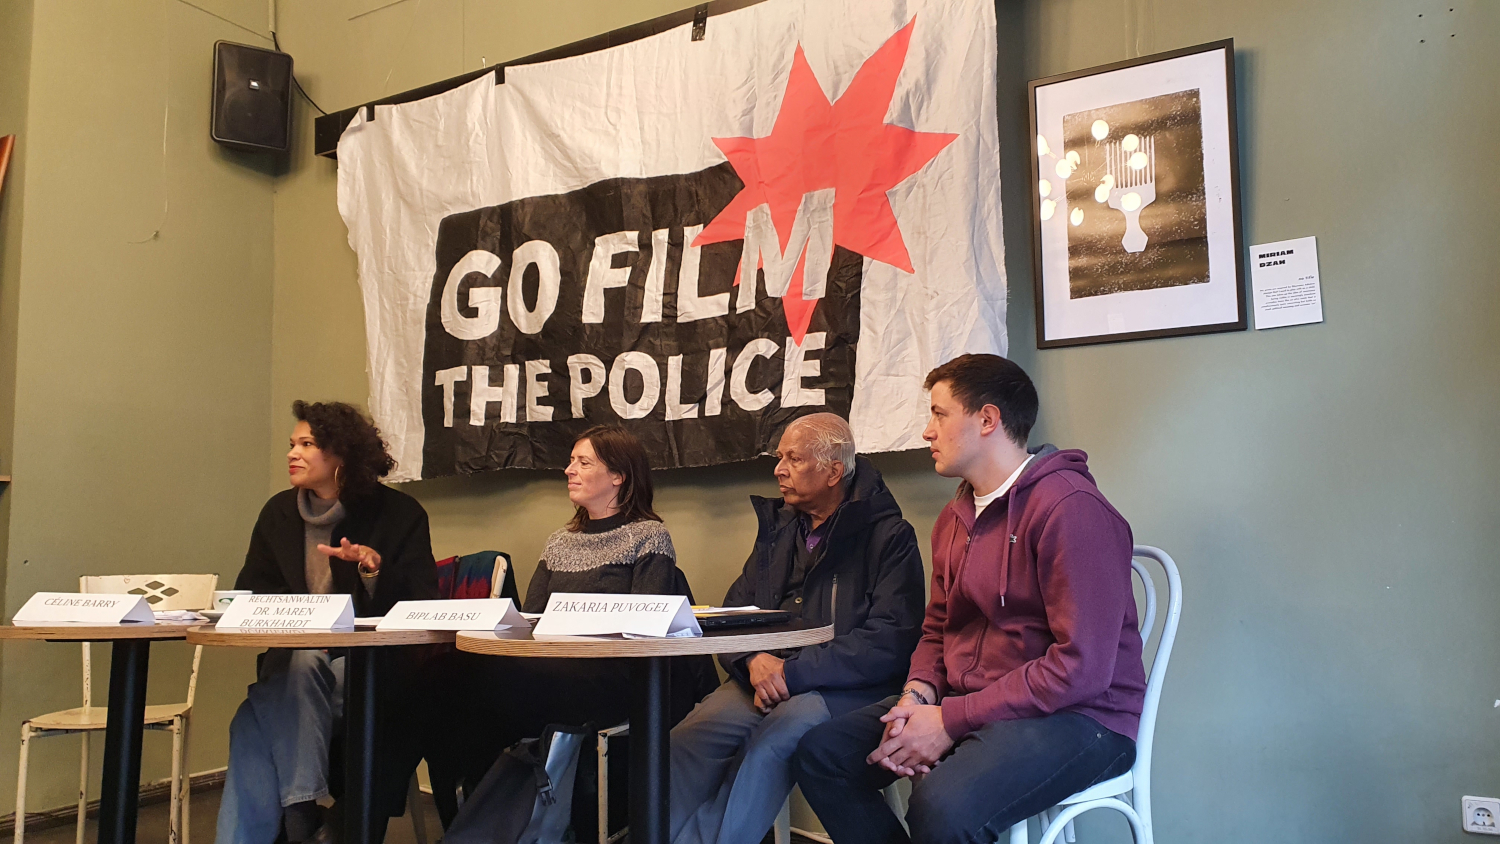 Go film the police: How the police want to define the "de facto public"